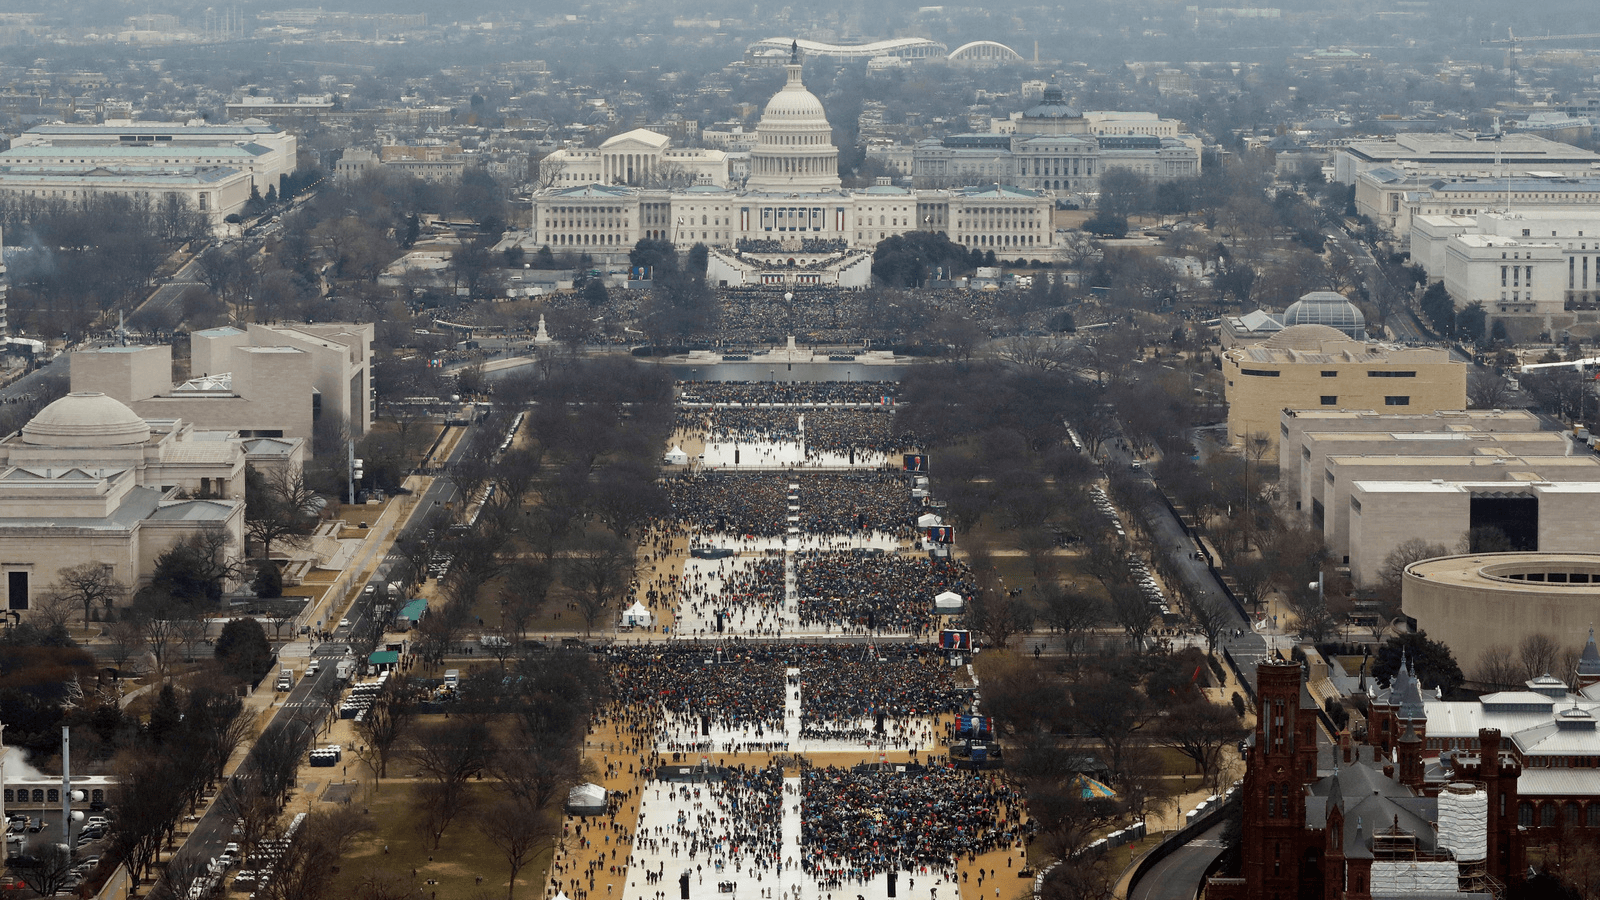 Attendees partake in the inauguration ceremonies to swear in Donald Trump as the 45th president of the United States at the US Capitol in Washington, Jan. 20, 2017. 